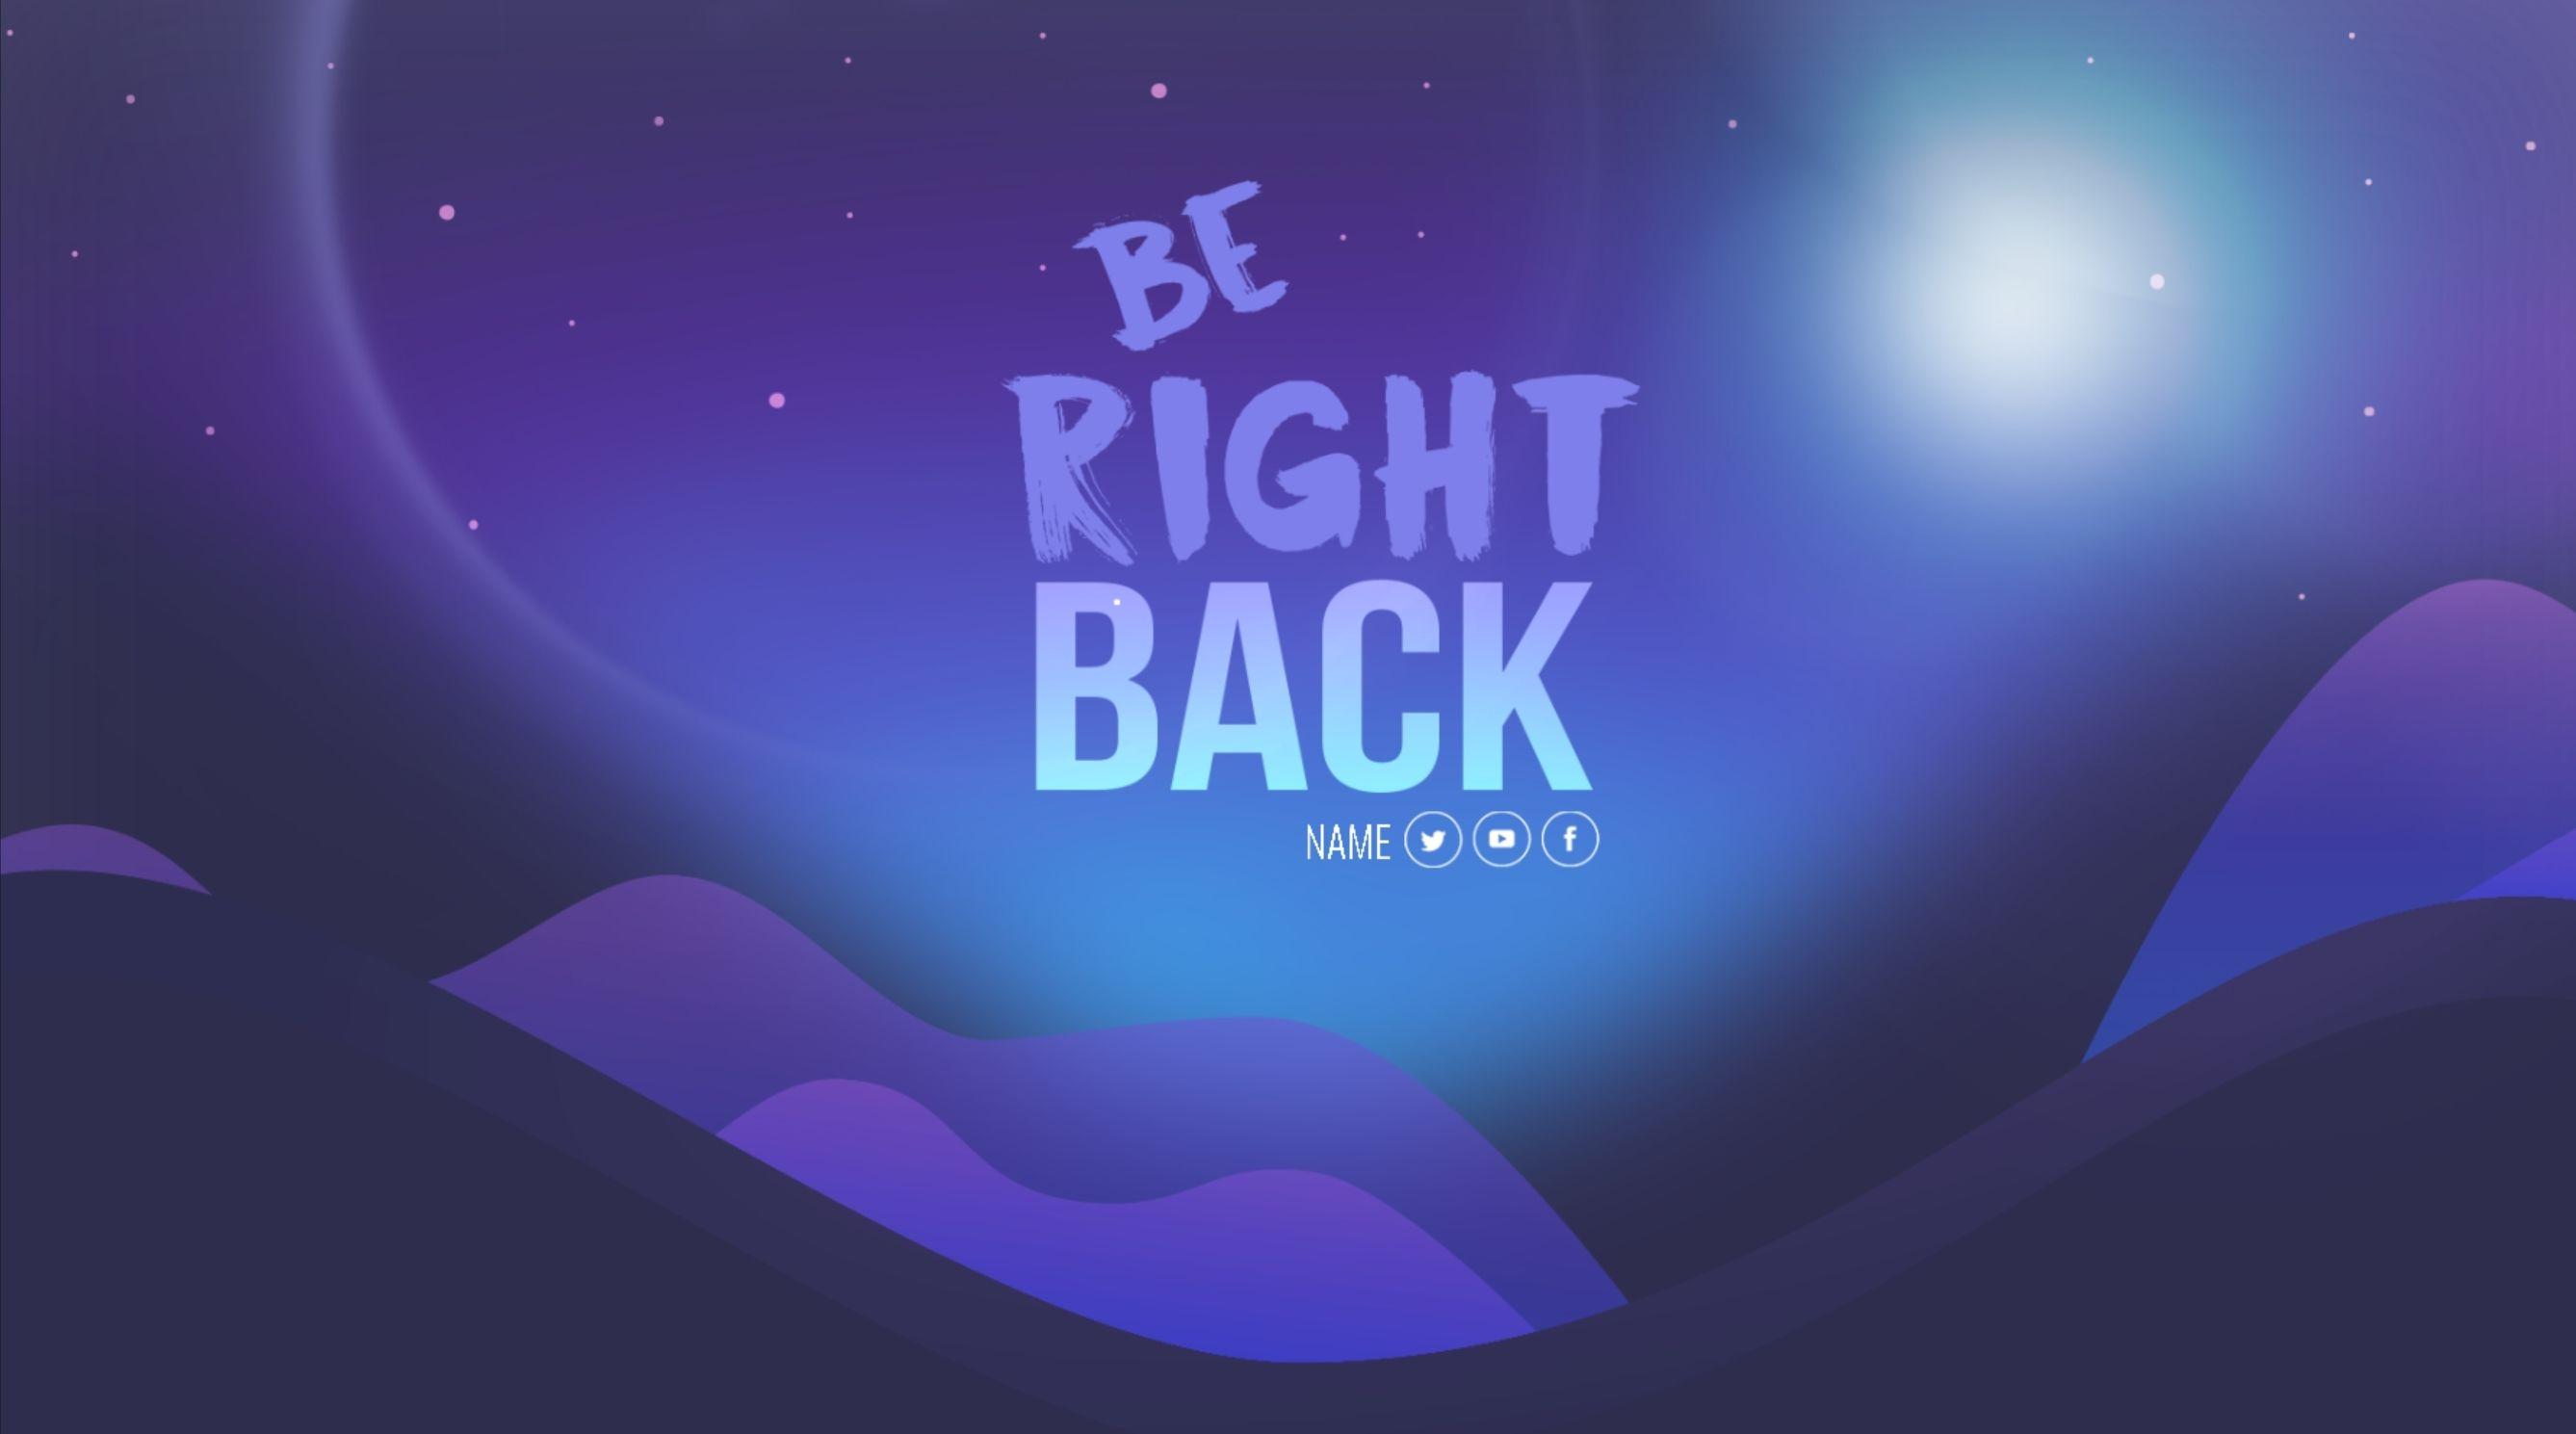 Library Streamlabs Twitch Be Right Back Graphic